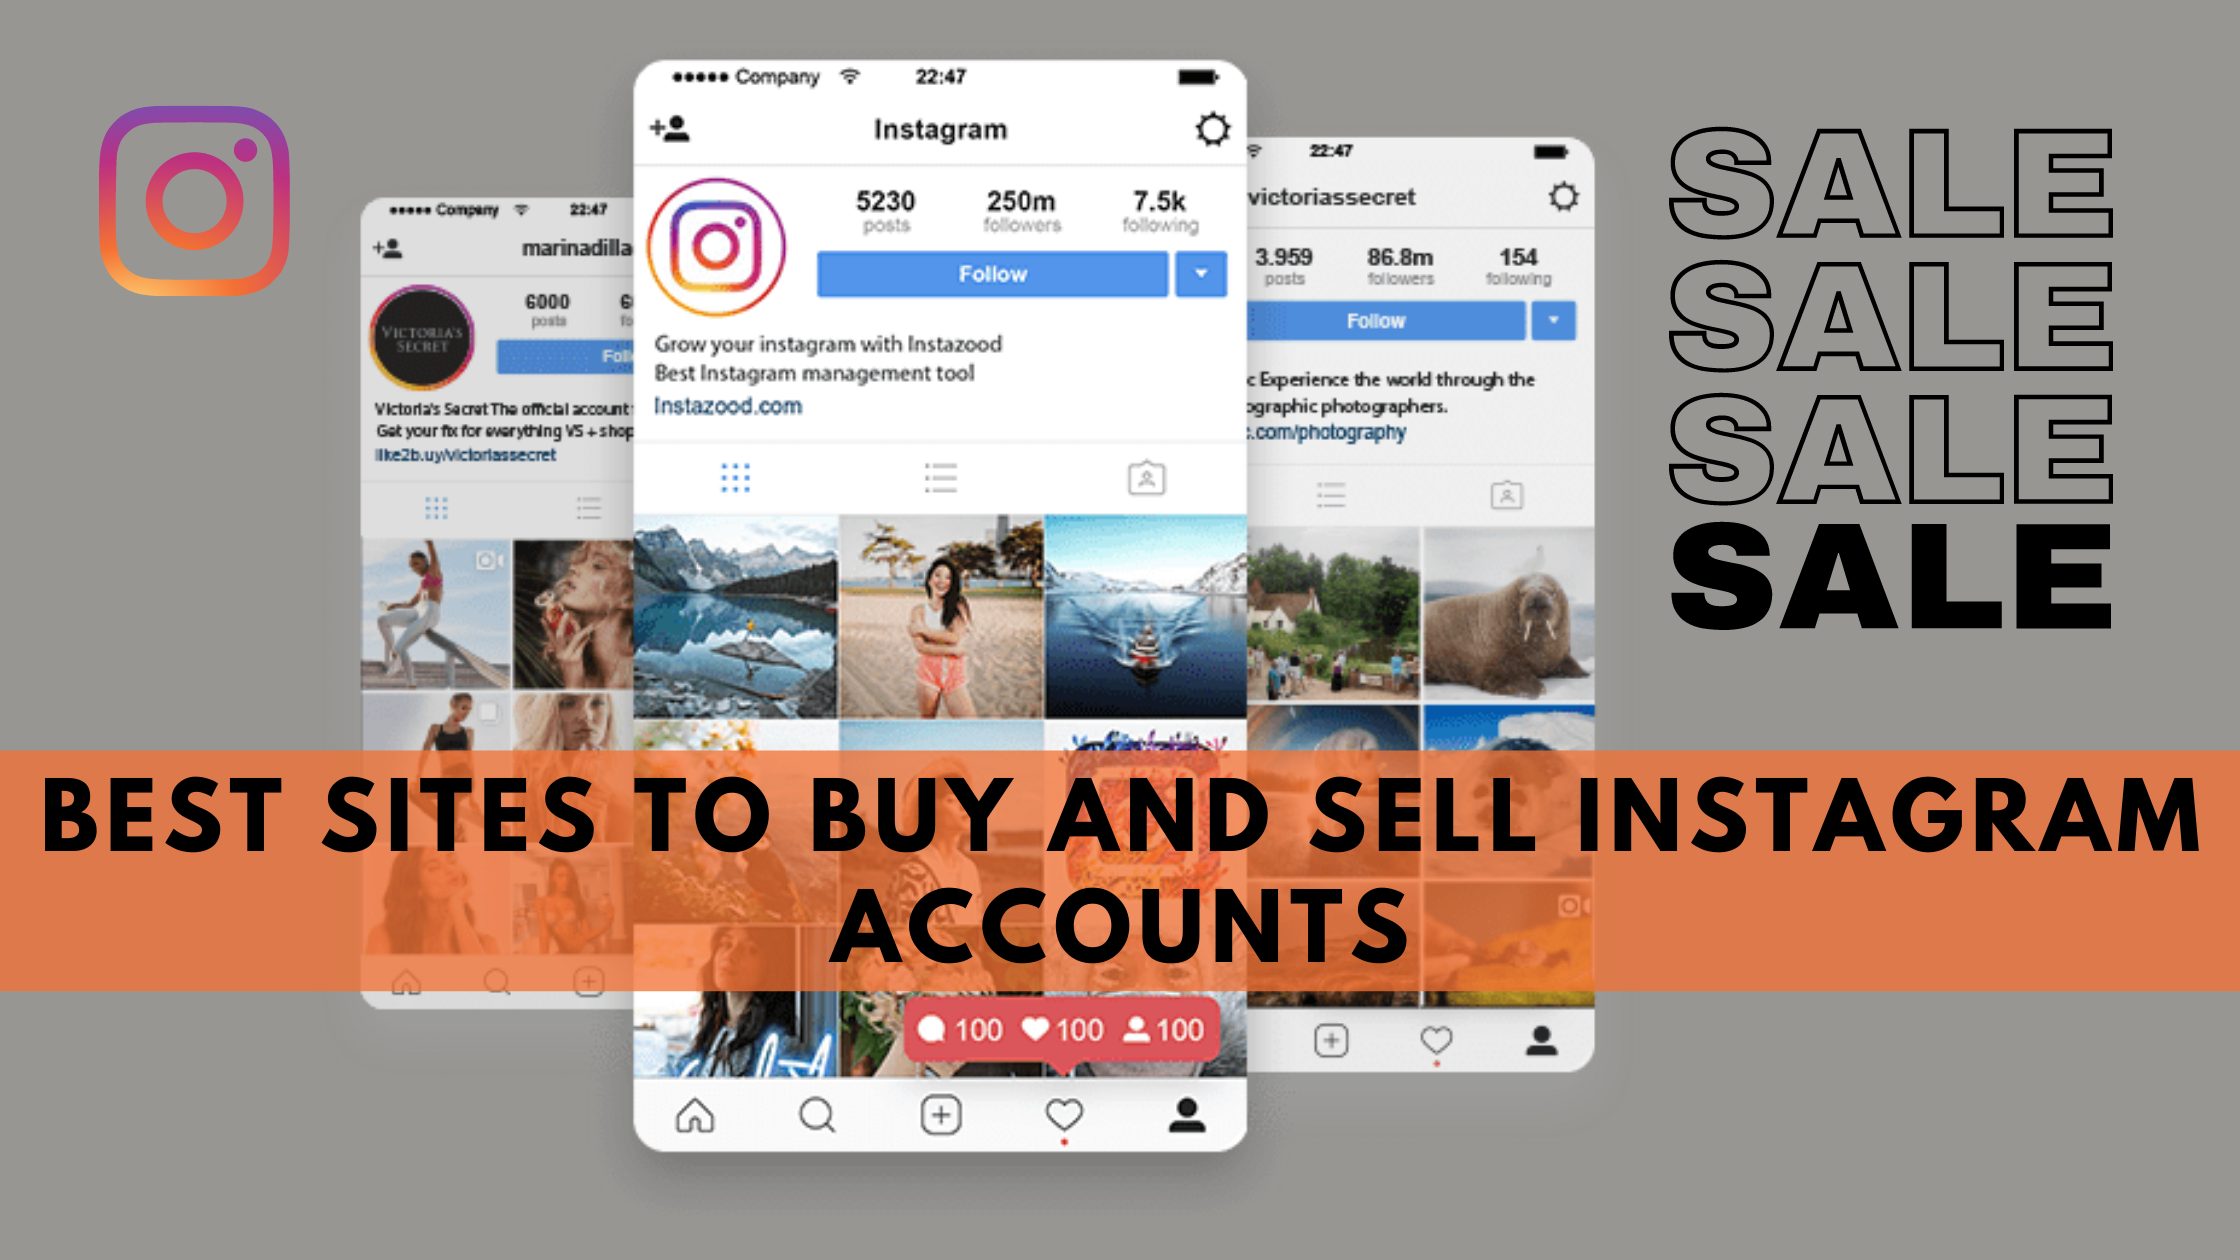 5 Best Sites To Buy And Sell Instagram Accounts 21